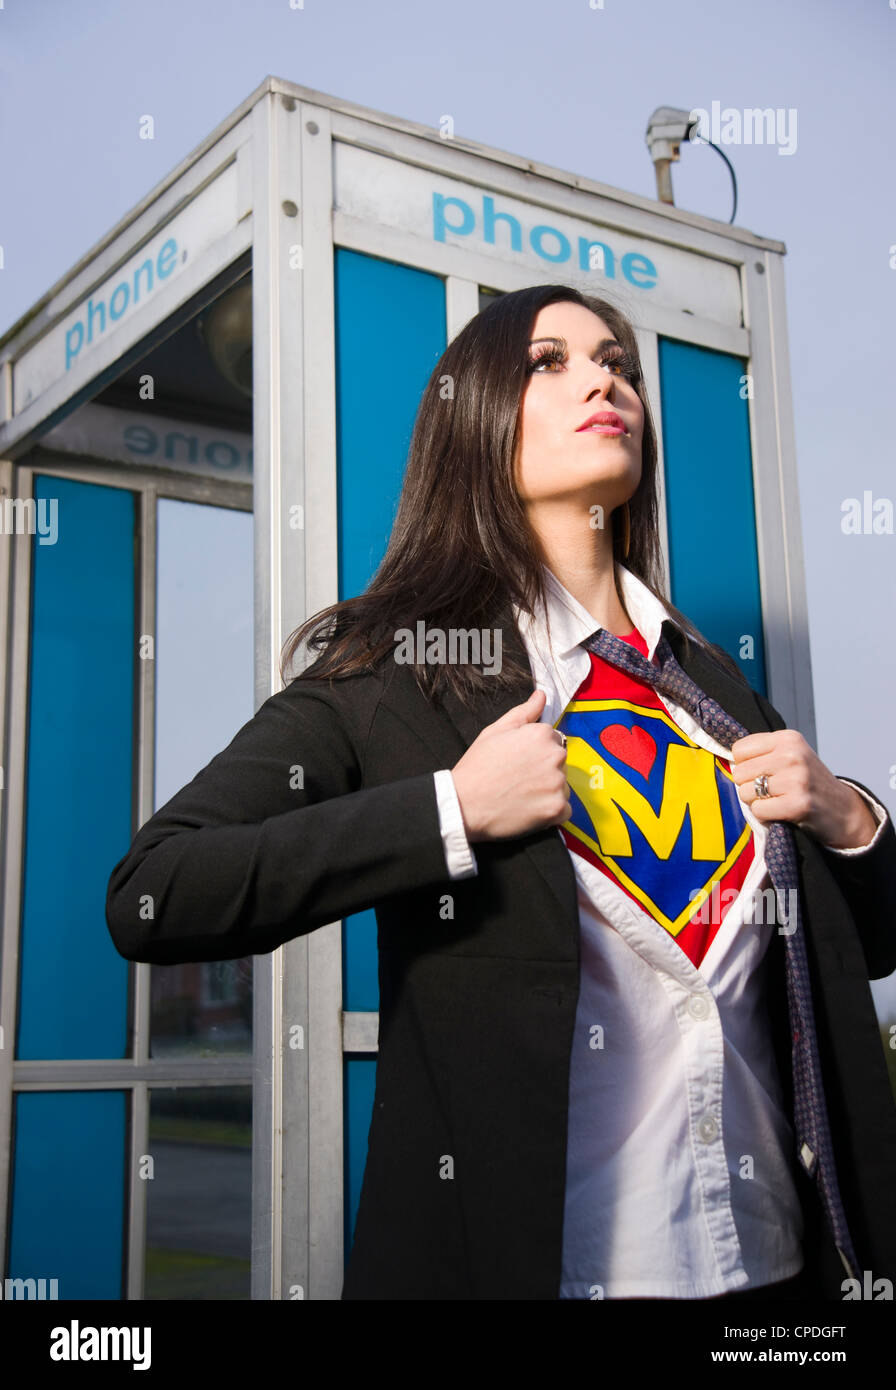 A Woman shows her Super Mother Uniform underneath her street clothes outside a phone booth Stock Photo